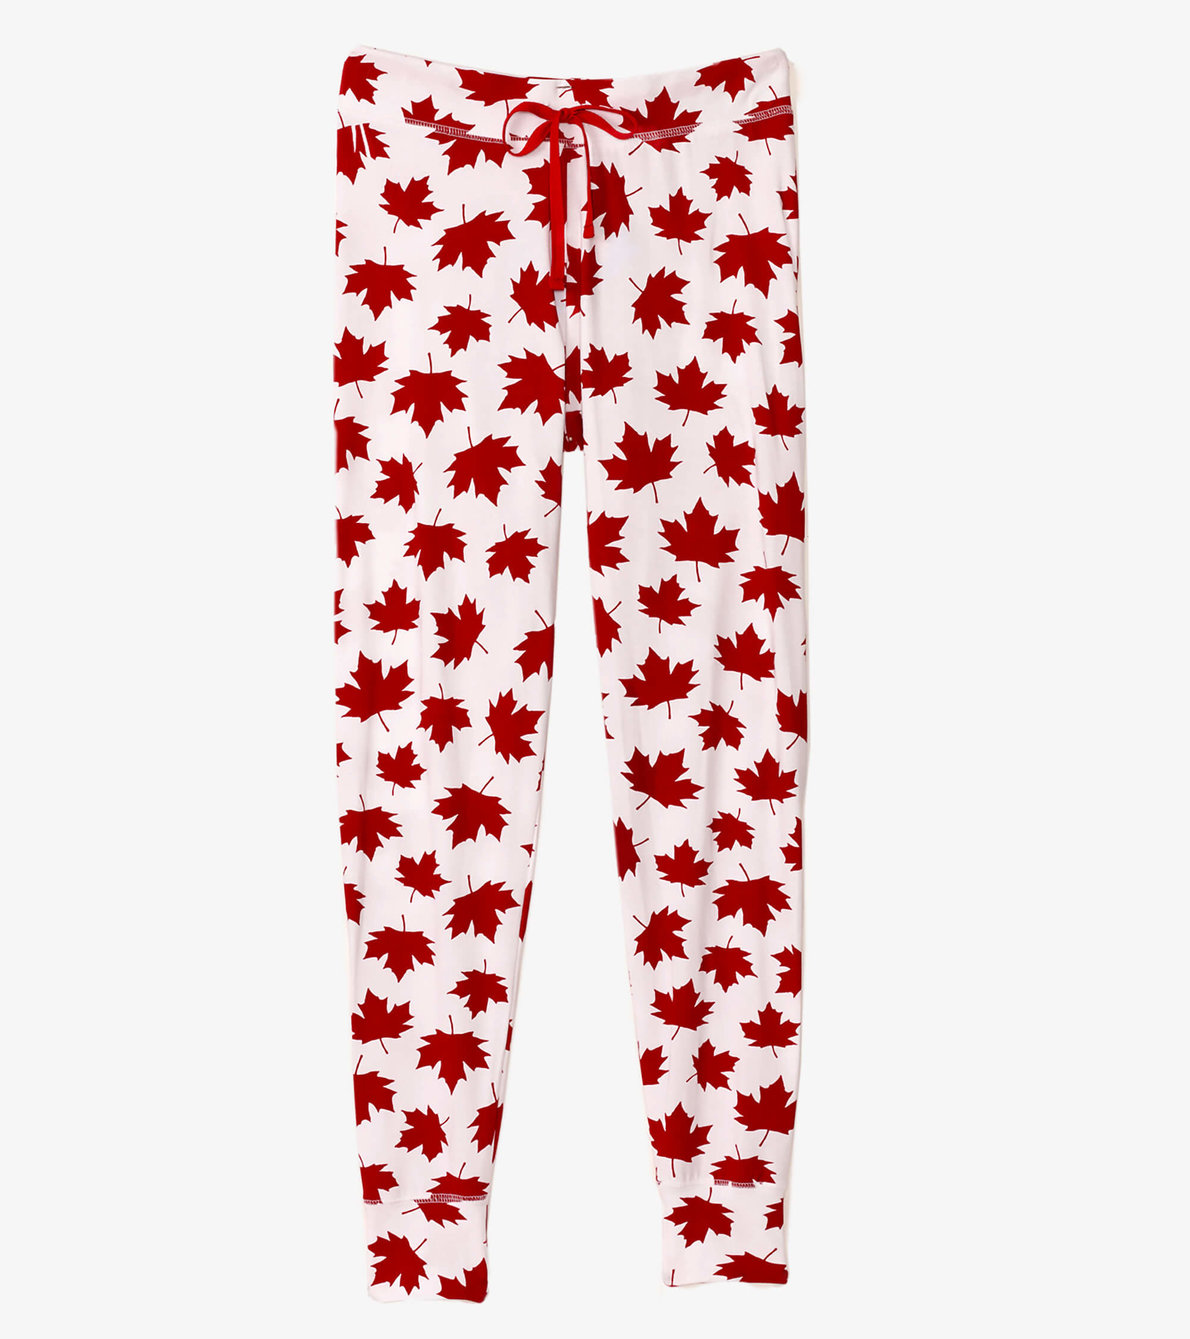 View larger image of Made in Canada Women’s Sleep Leggings